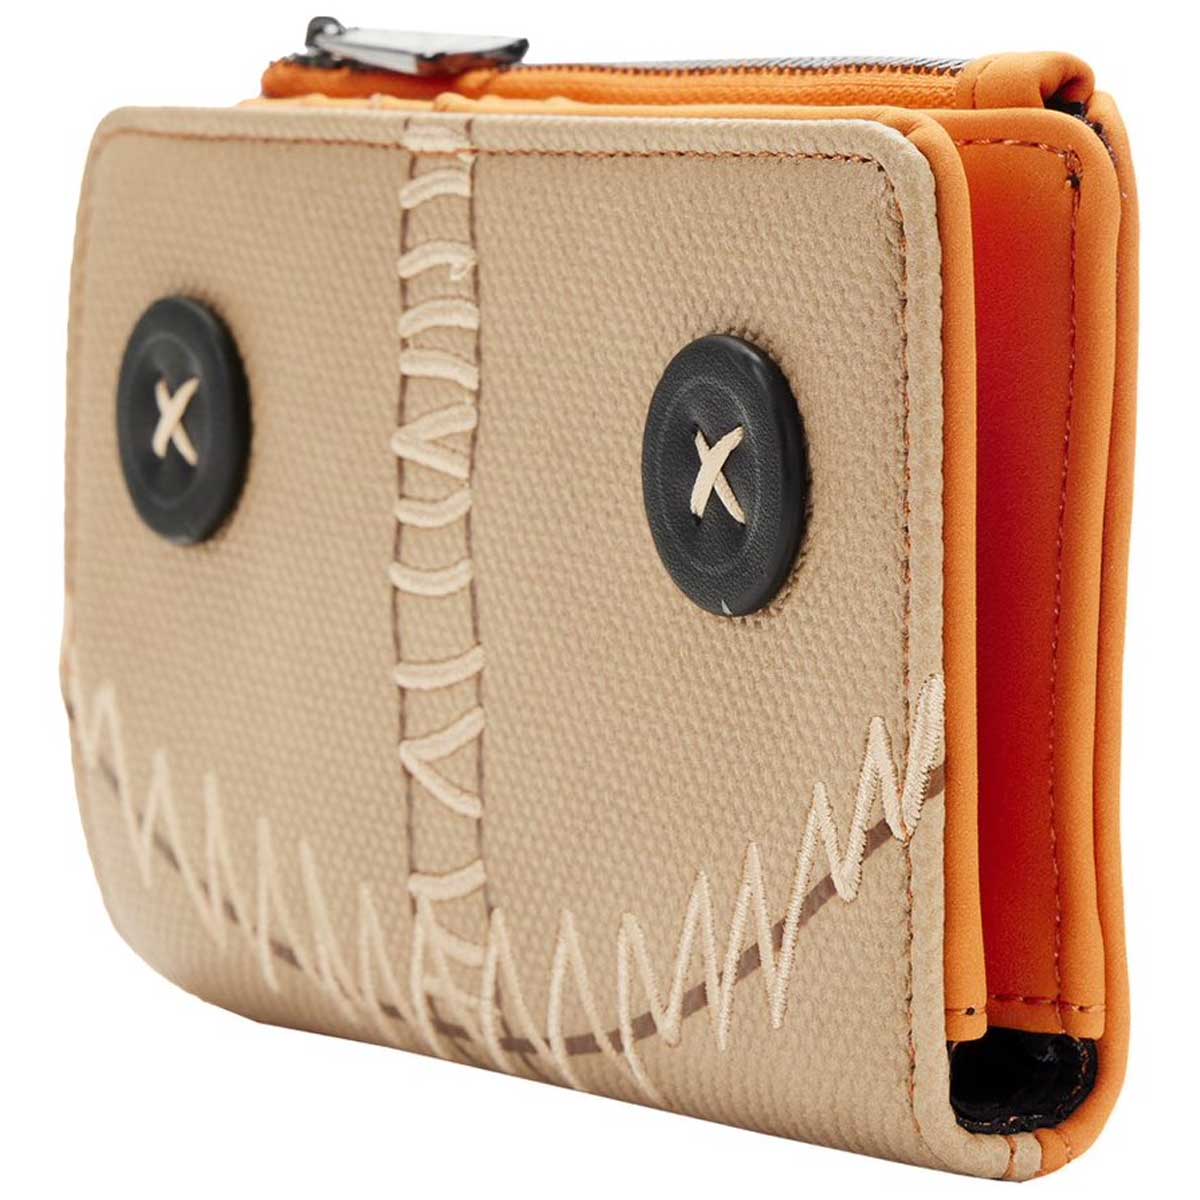 Loungefly x Trick Or Treat Sam Cosplay Purse - GeekCore